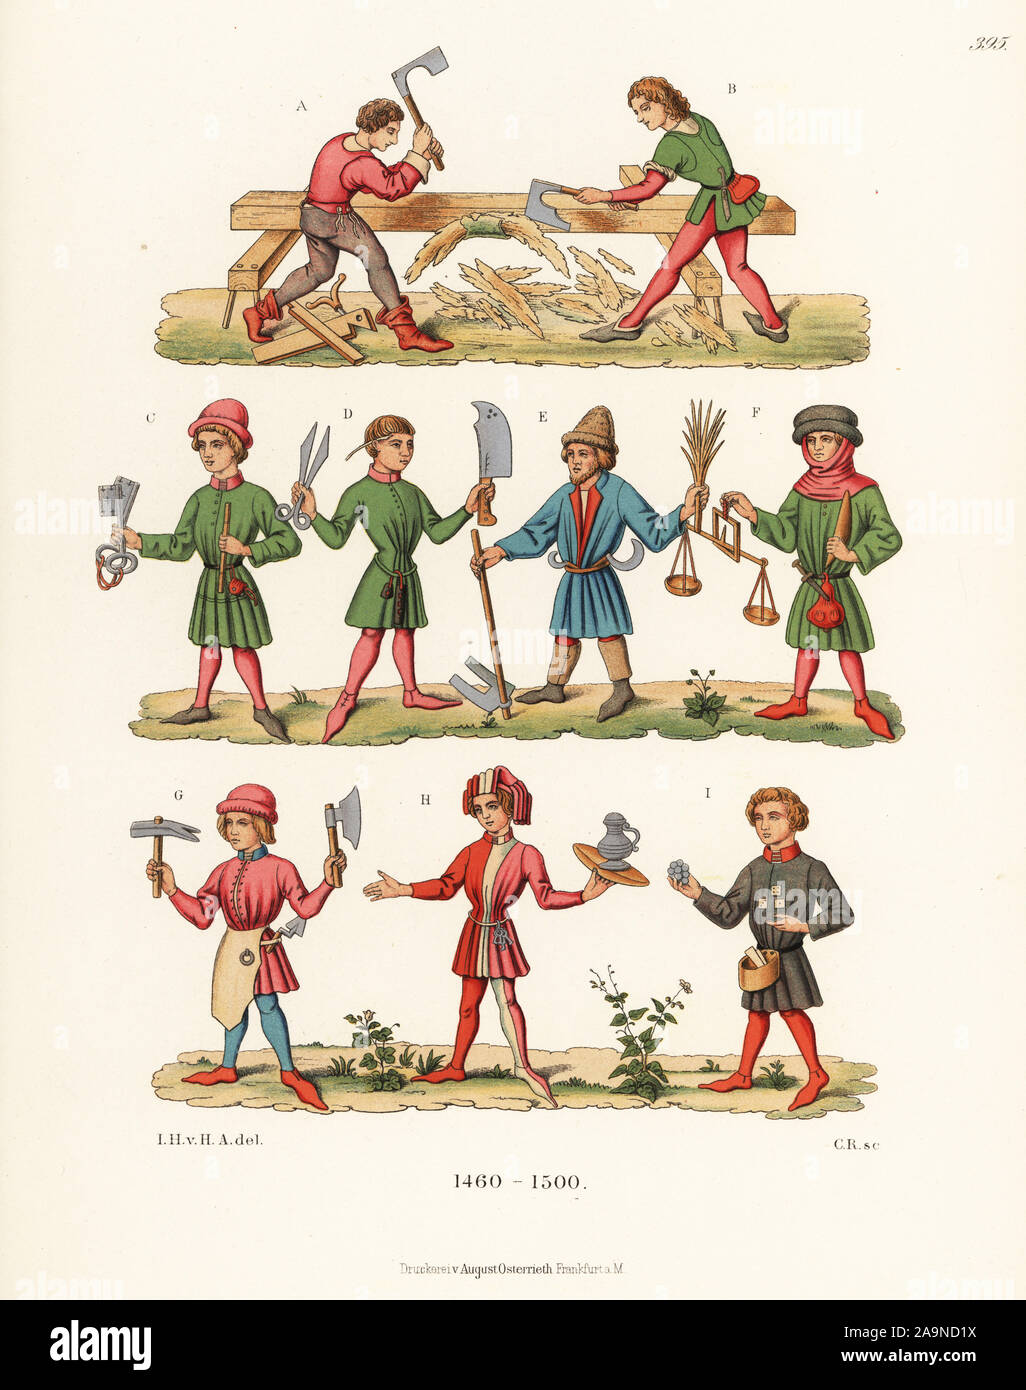 Costumes of German tradesmen, late 15th century. Carpenters with adze working on Noah’s Ark A and B from the Nuremberg Chronicle. Guard with keys C, leatherworker and shoemaker D, farmer with wheat E, merchant with scales F, carpenter with hammer G, innkeeper with tray H, and toymaker I from a chess book, Schachzabelbuch. Chromolithograph from Hefner-Alteneck's Costumes, Artworks and Appliances from the Middle Ages to the 17th Century, Frankfurt, 1889. Illustration by Dr. Jakob Heinrich von Hefner-Alteneck, lithographed by C. Regnier. Dr. Hefner-Alteneck (1811 - 1903) was a German museum curat Stock Photo